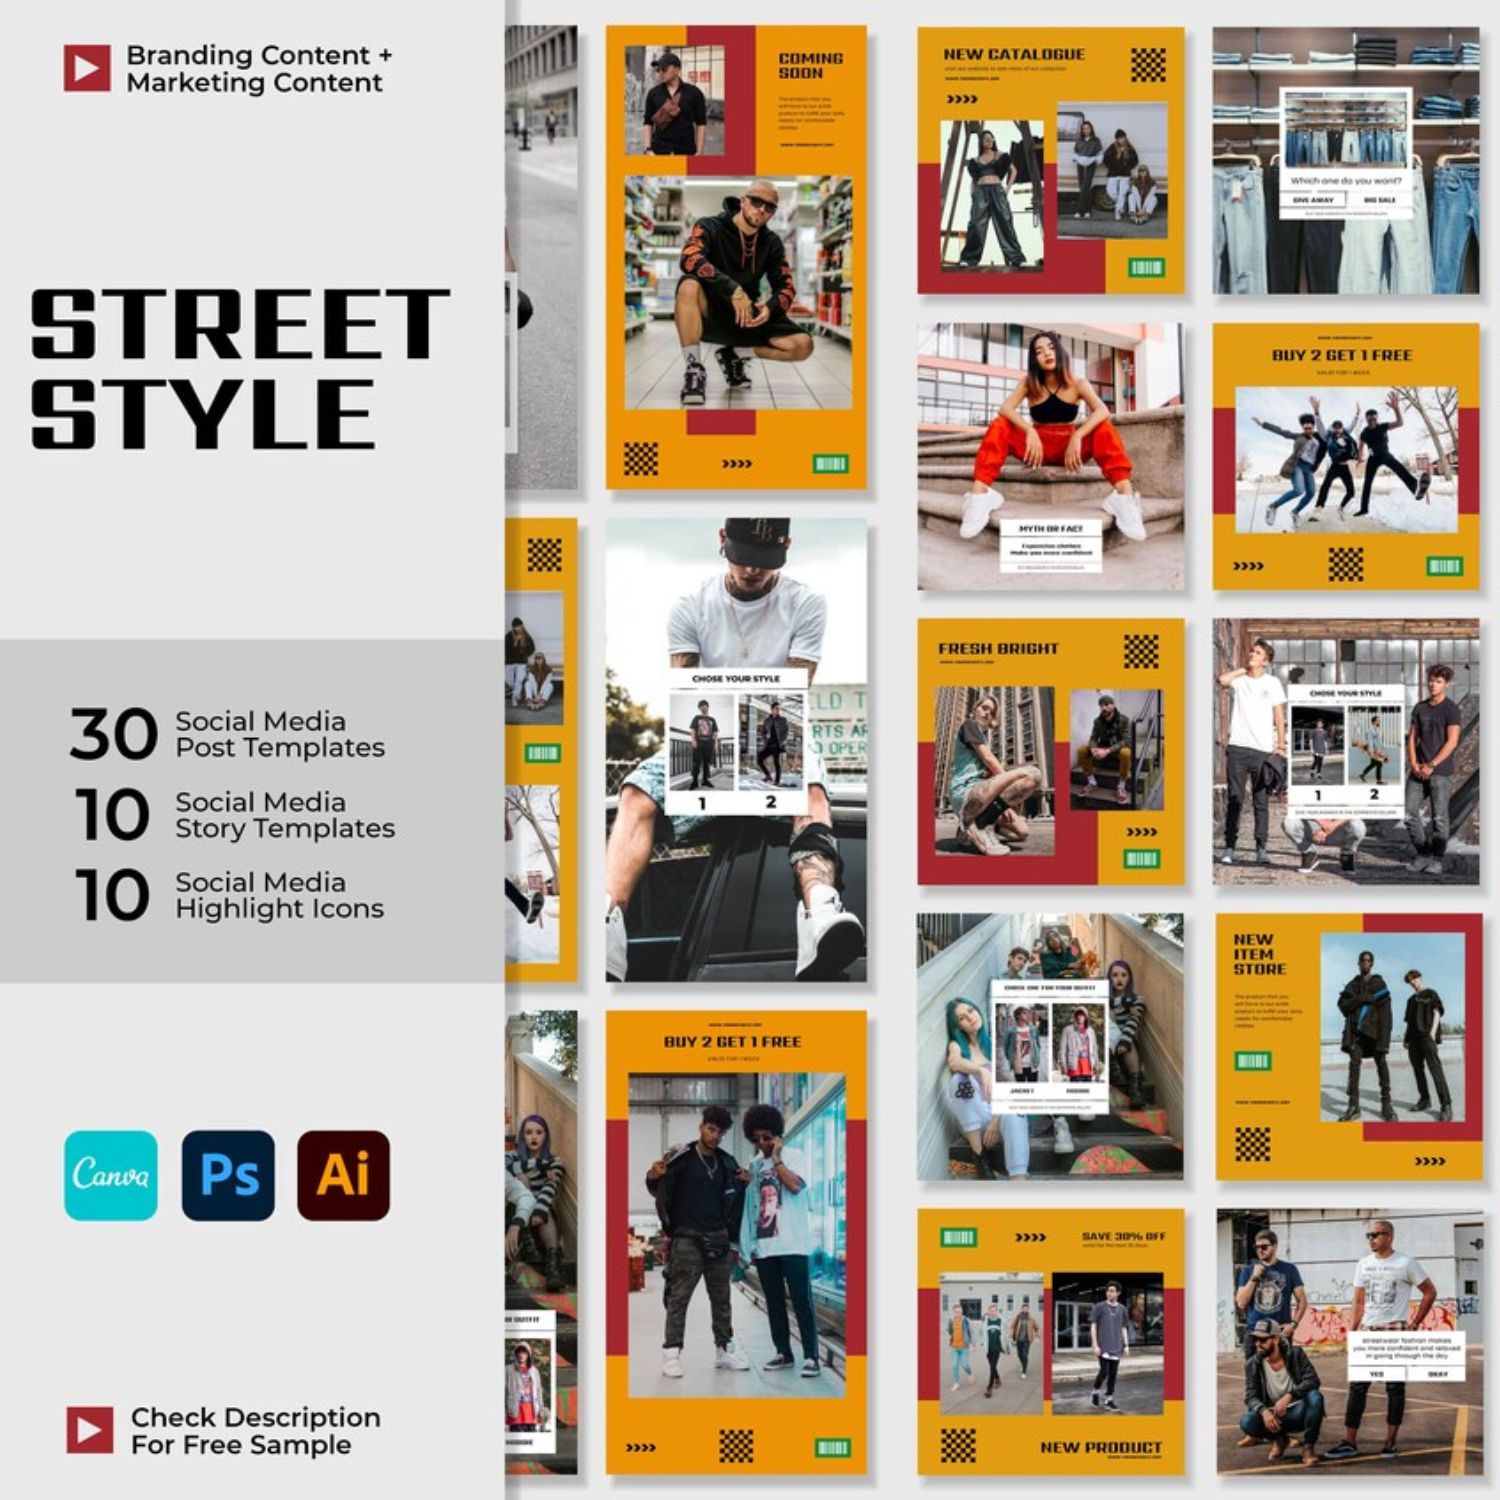 Street Style Streetwear Clothing Complete Branding Kit Template For Instagram Cover Image.